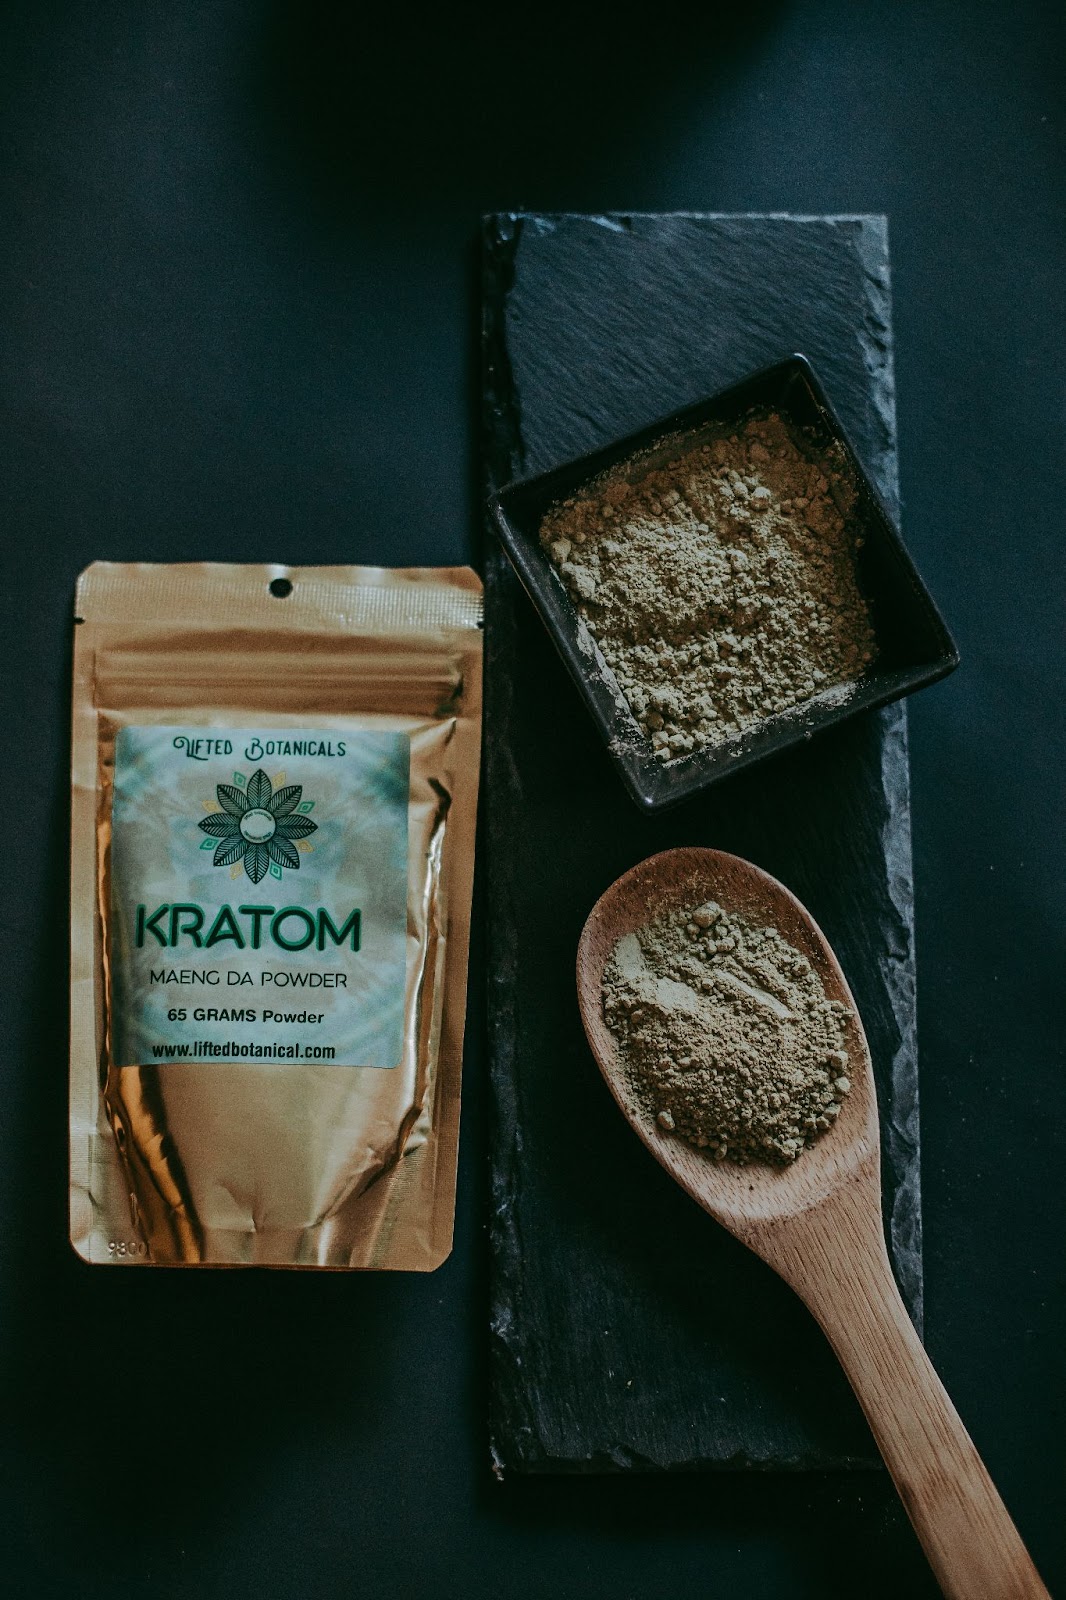 Can You Drink Horned Kratom Tea For Relieving Stress?